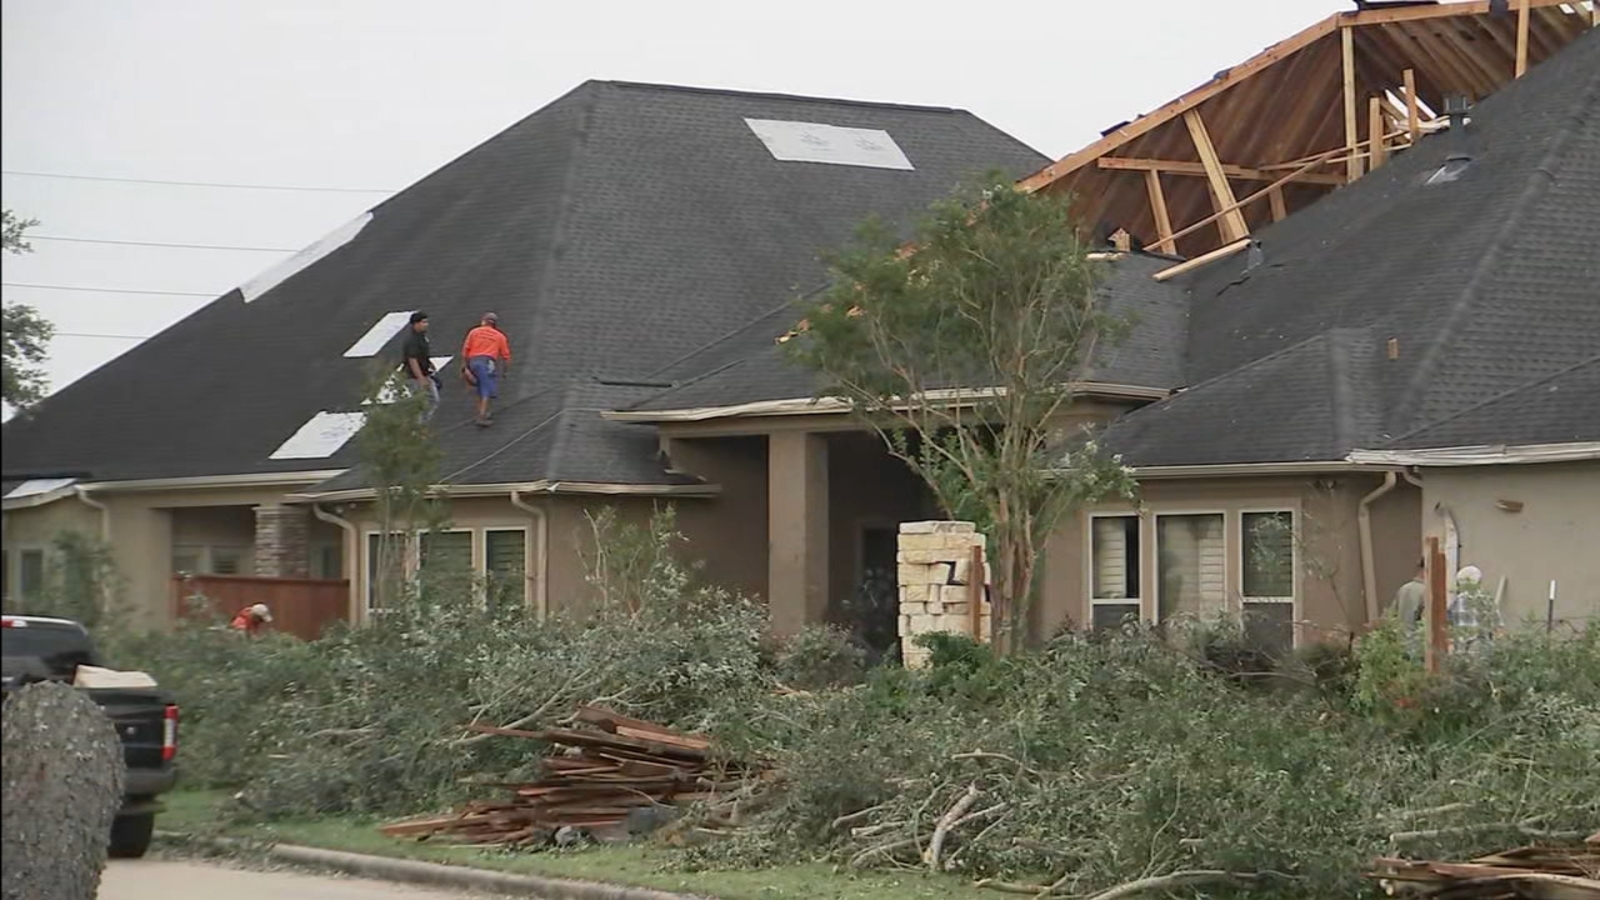 Texas severe storm damage: The Heritage at Towne Lake cleans up after tornado hit Cypress, Texas in northwest Harris County [Video]